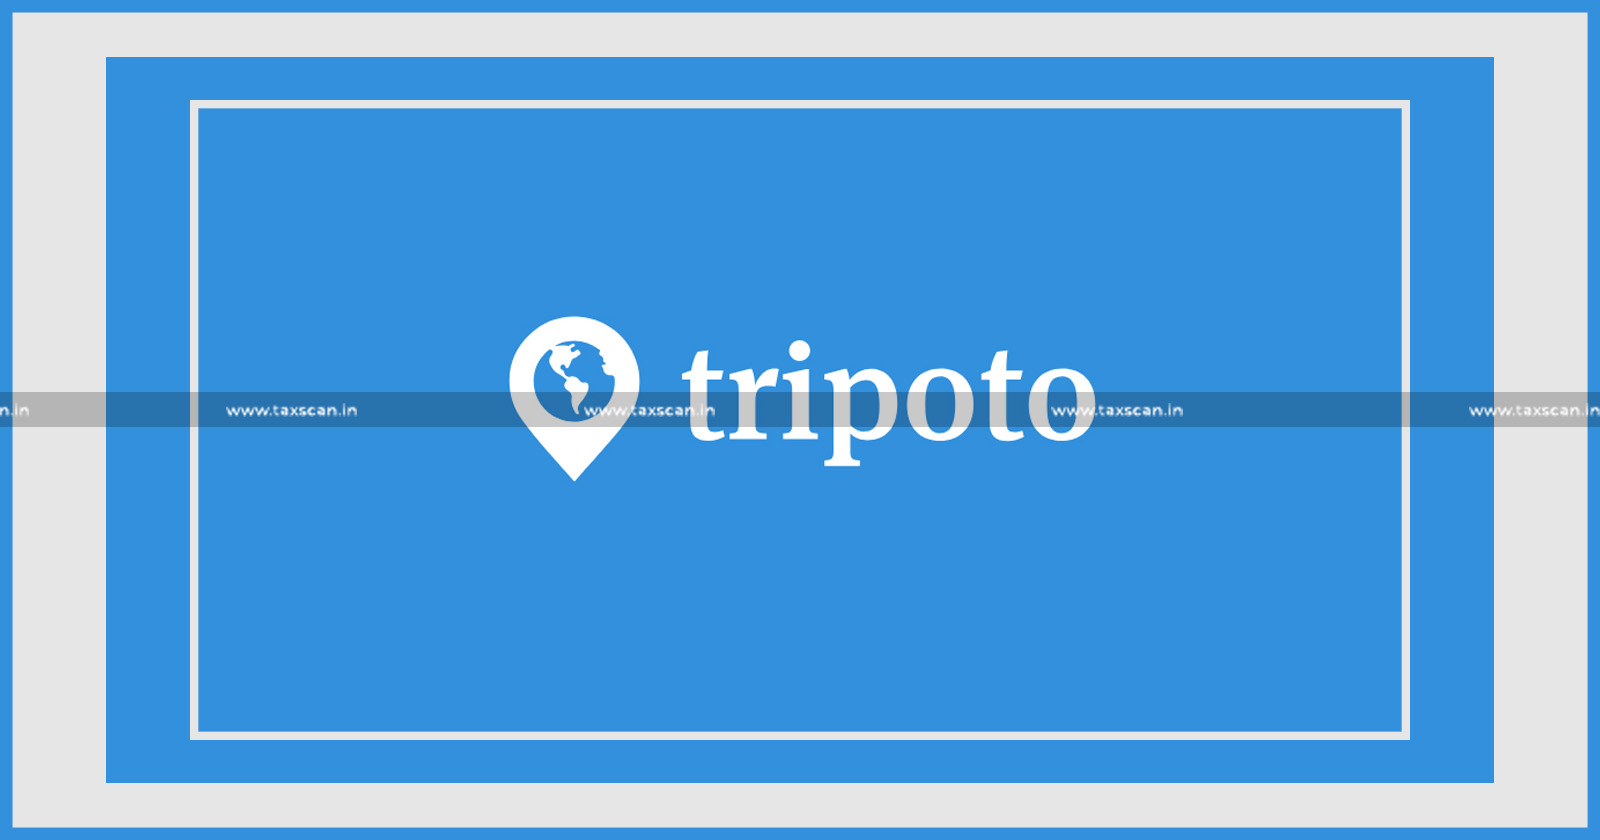 Relief to Tripoto - Tripoto - ITAT directs Re-Adjudication on Income Tax Deduction Claim - ITAT - Re-Adjudication - Income Tax Deduction Claim - Income Tax Deduction - Taxscan